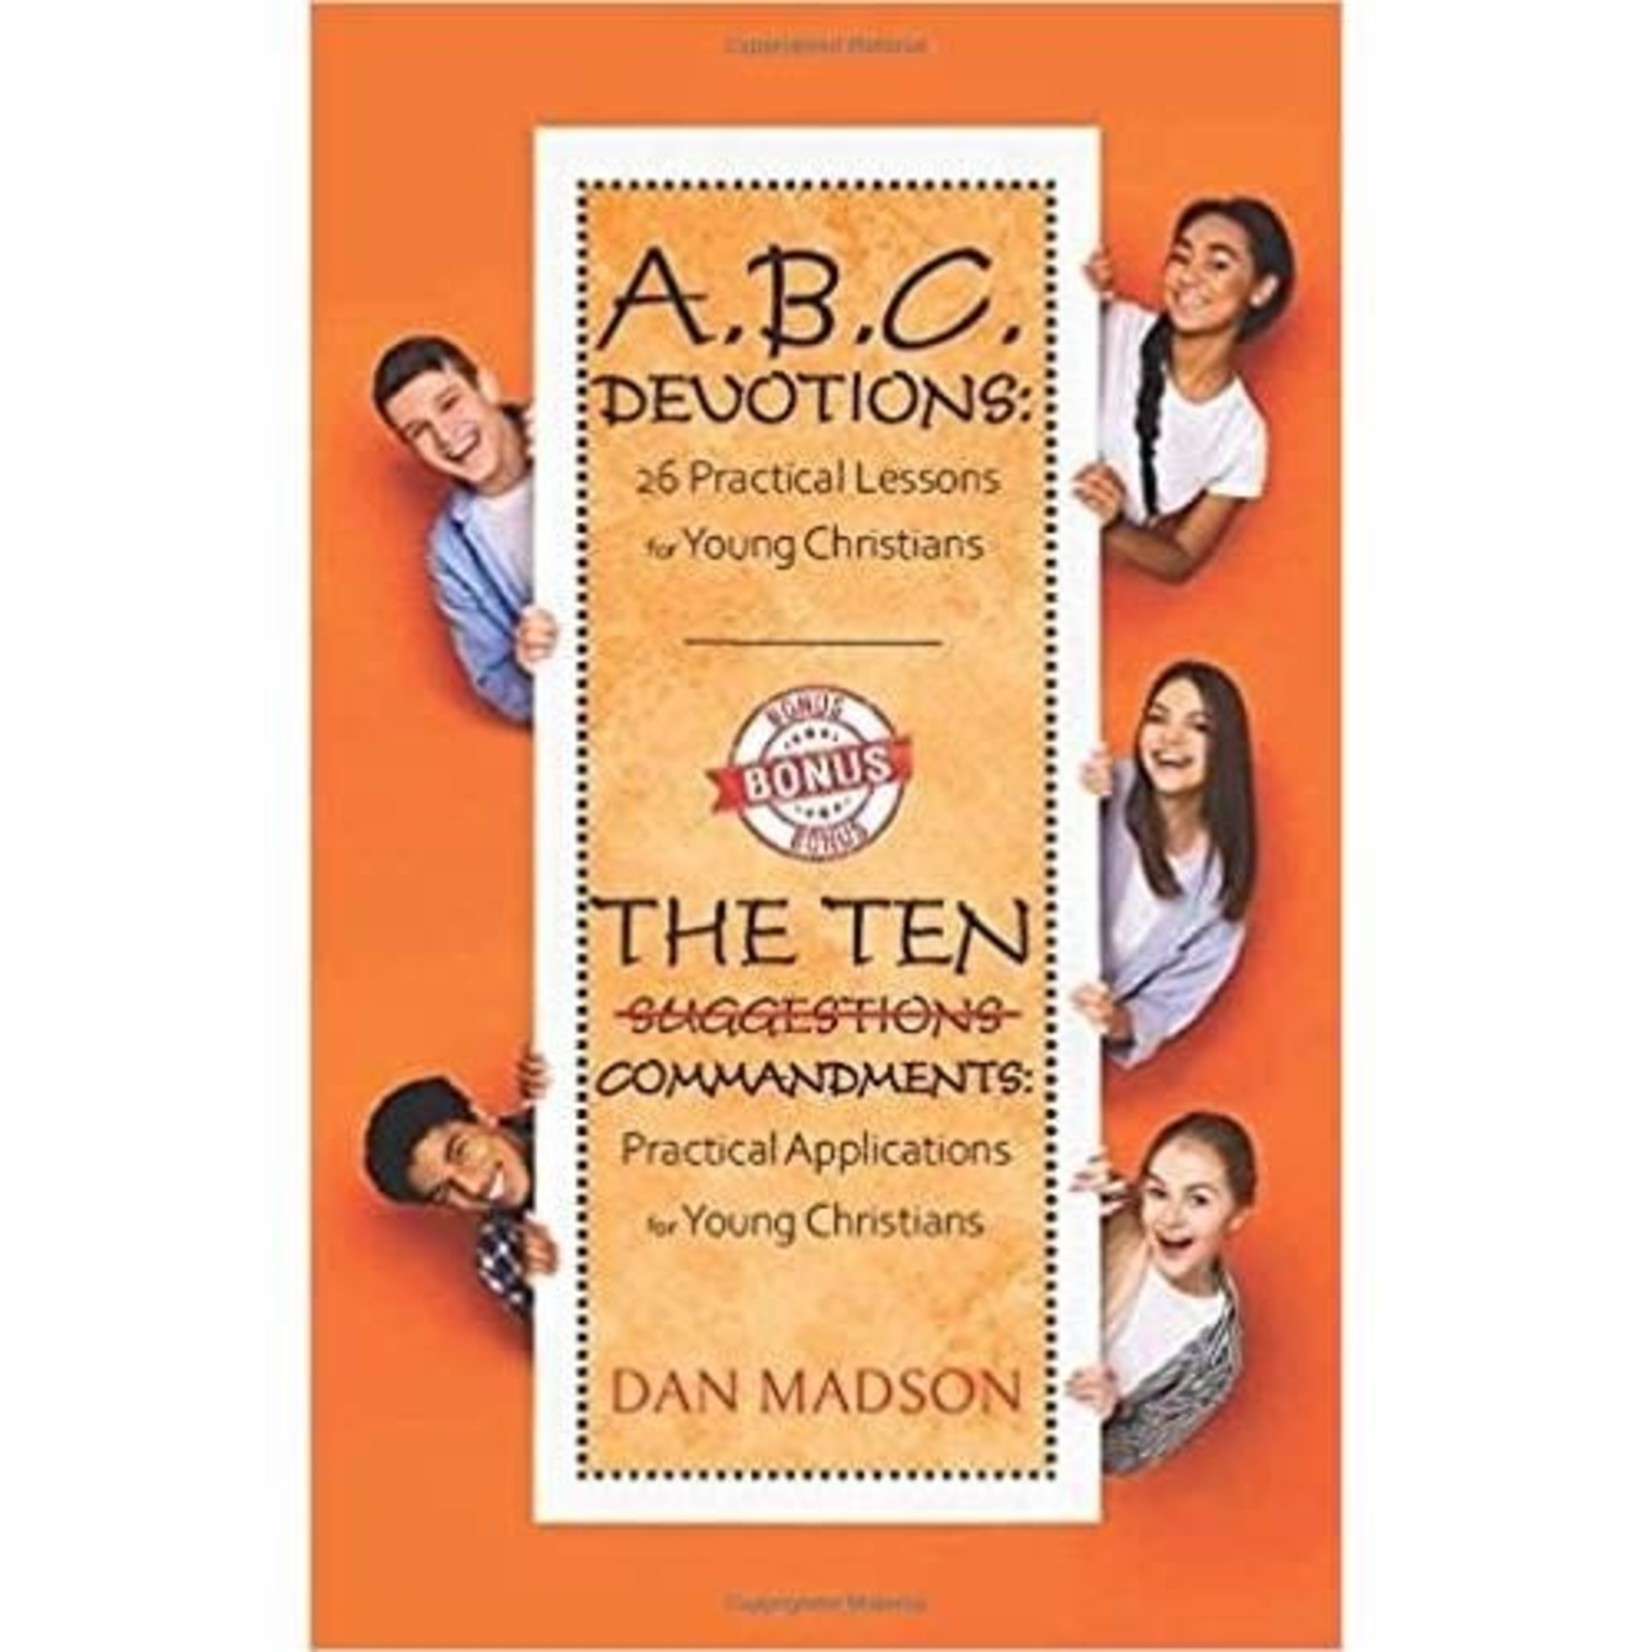 A.B.C. Devotions: 26 Practical Lessons for Young Christians